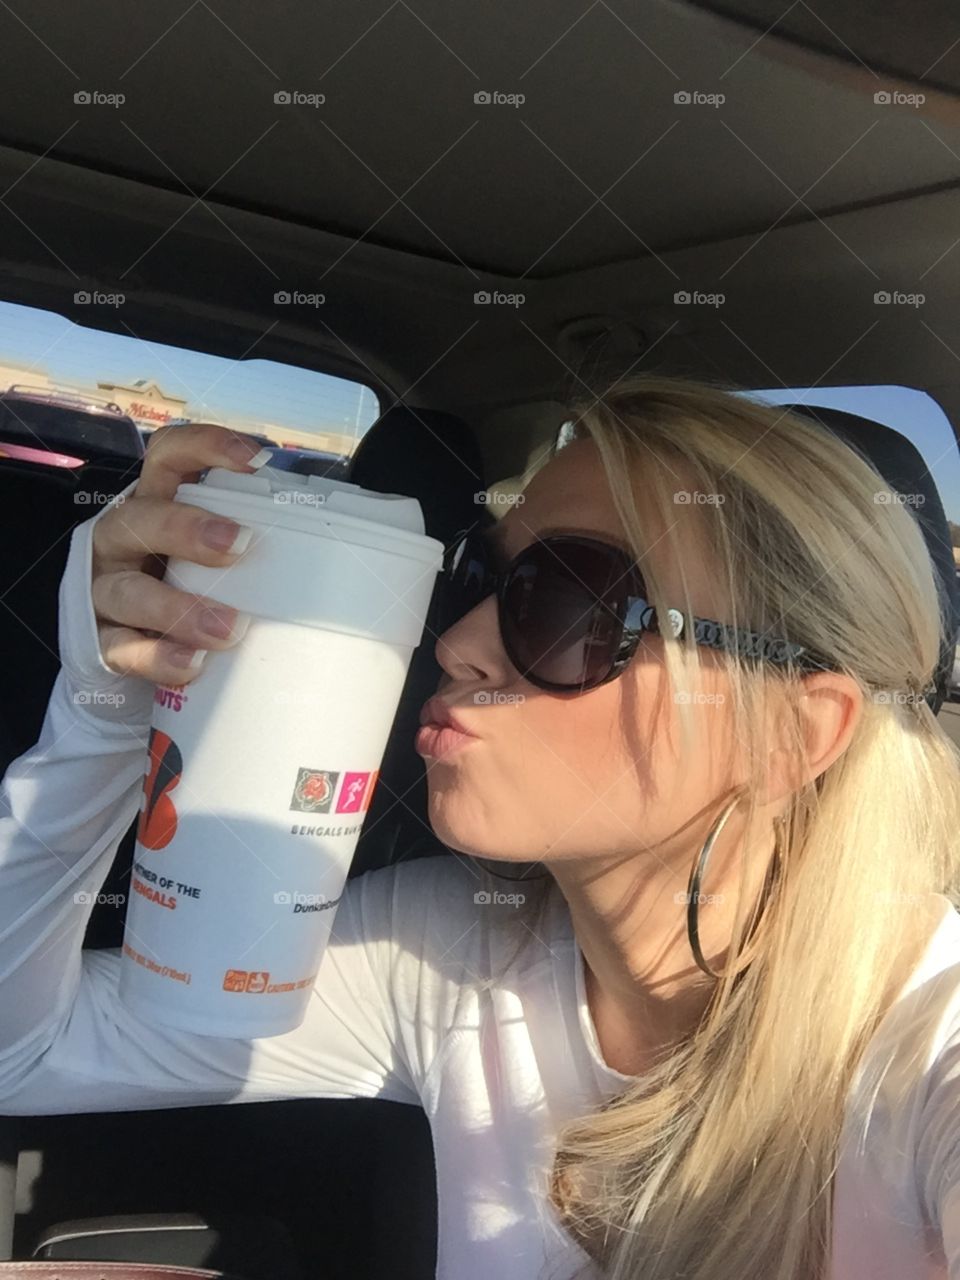 Love me some Dunkin Donuts